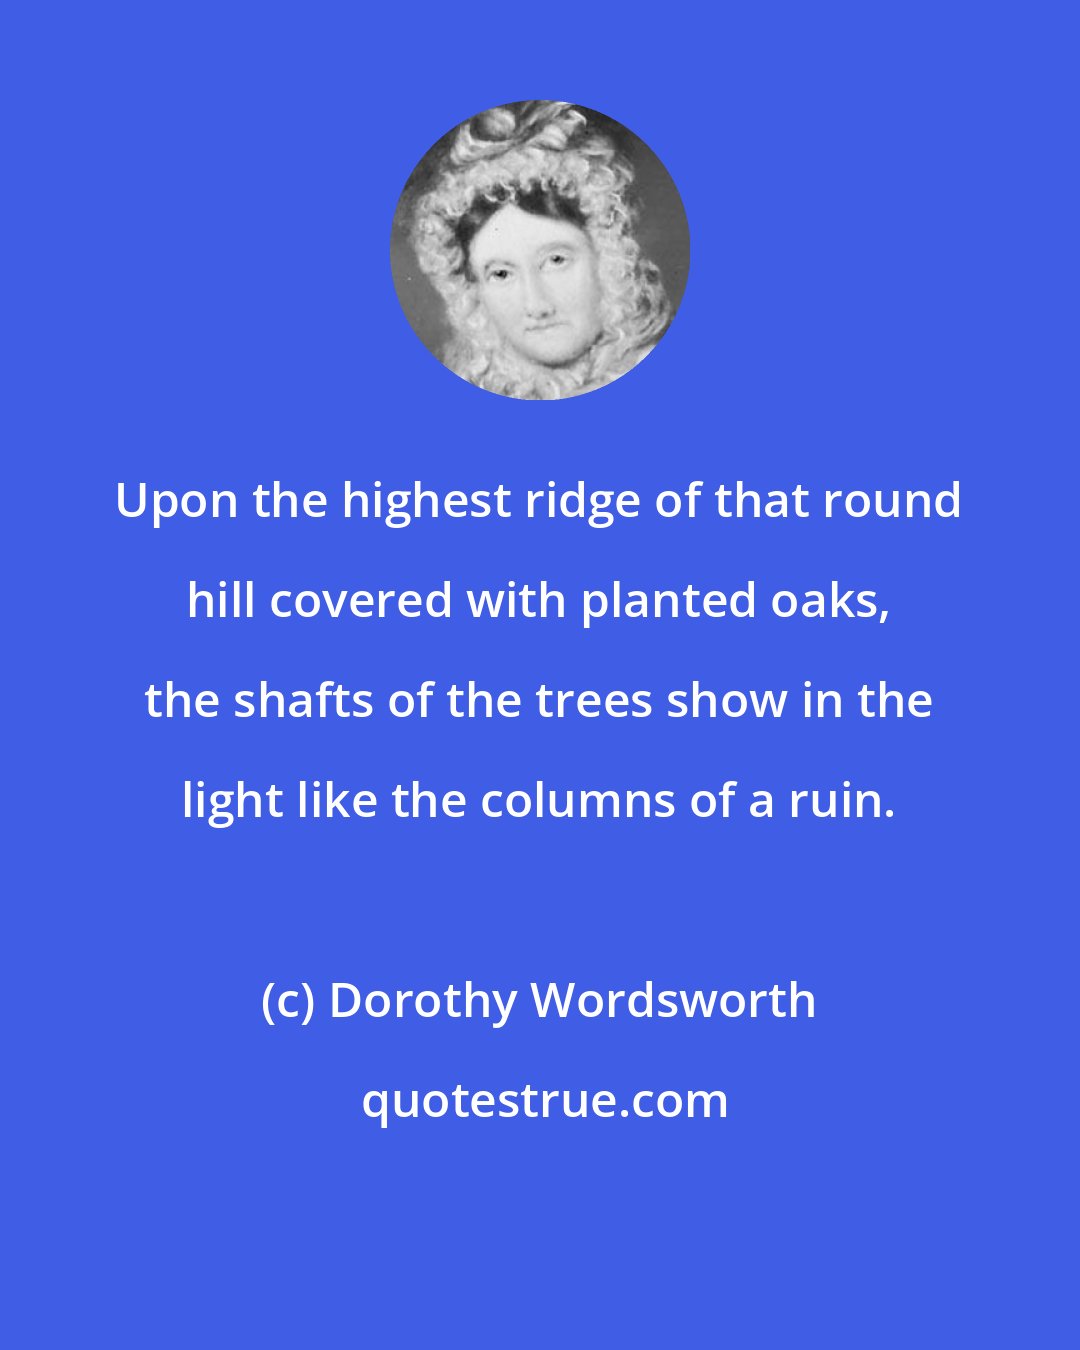 Dorothy Wordsworth: Upon the highest ridge of that round hill covered with planted oaks, the shafts of the trees show in the light like the columns of a ruin.